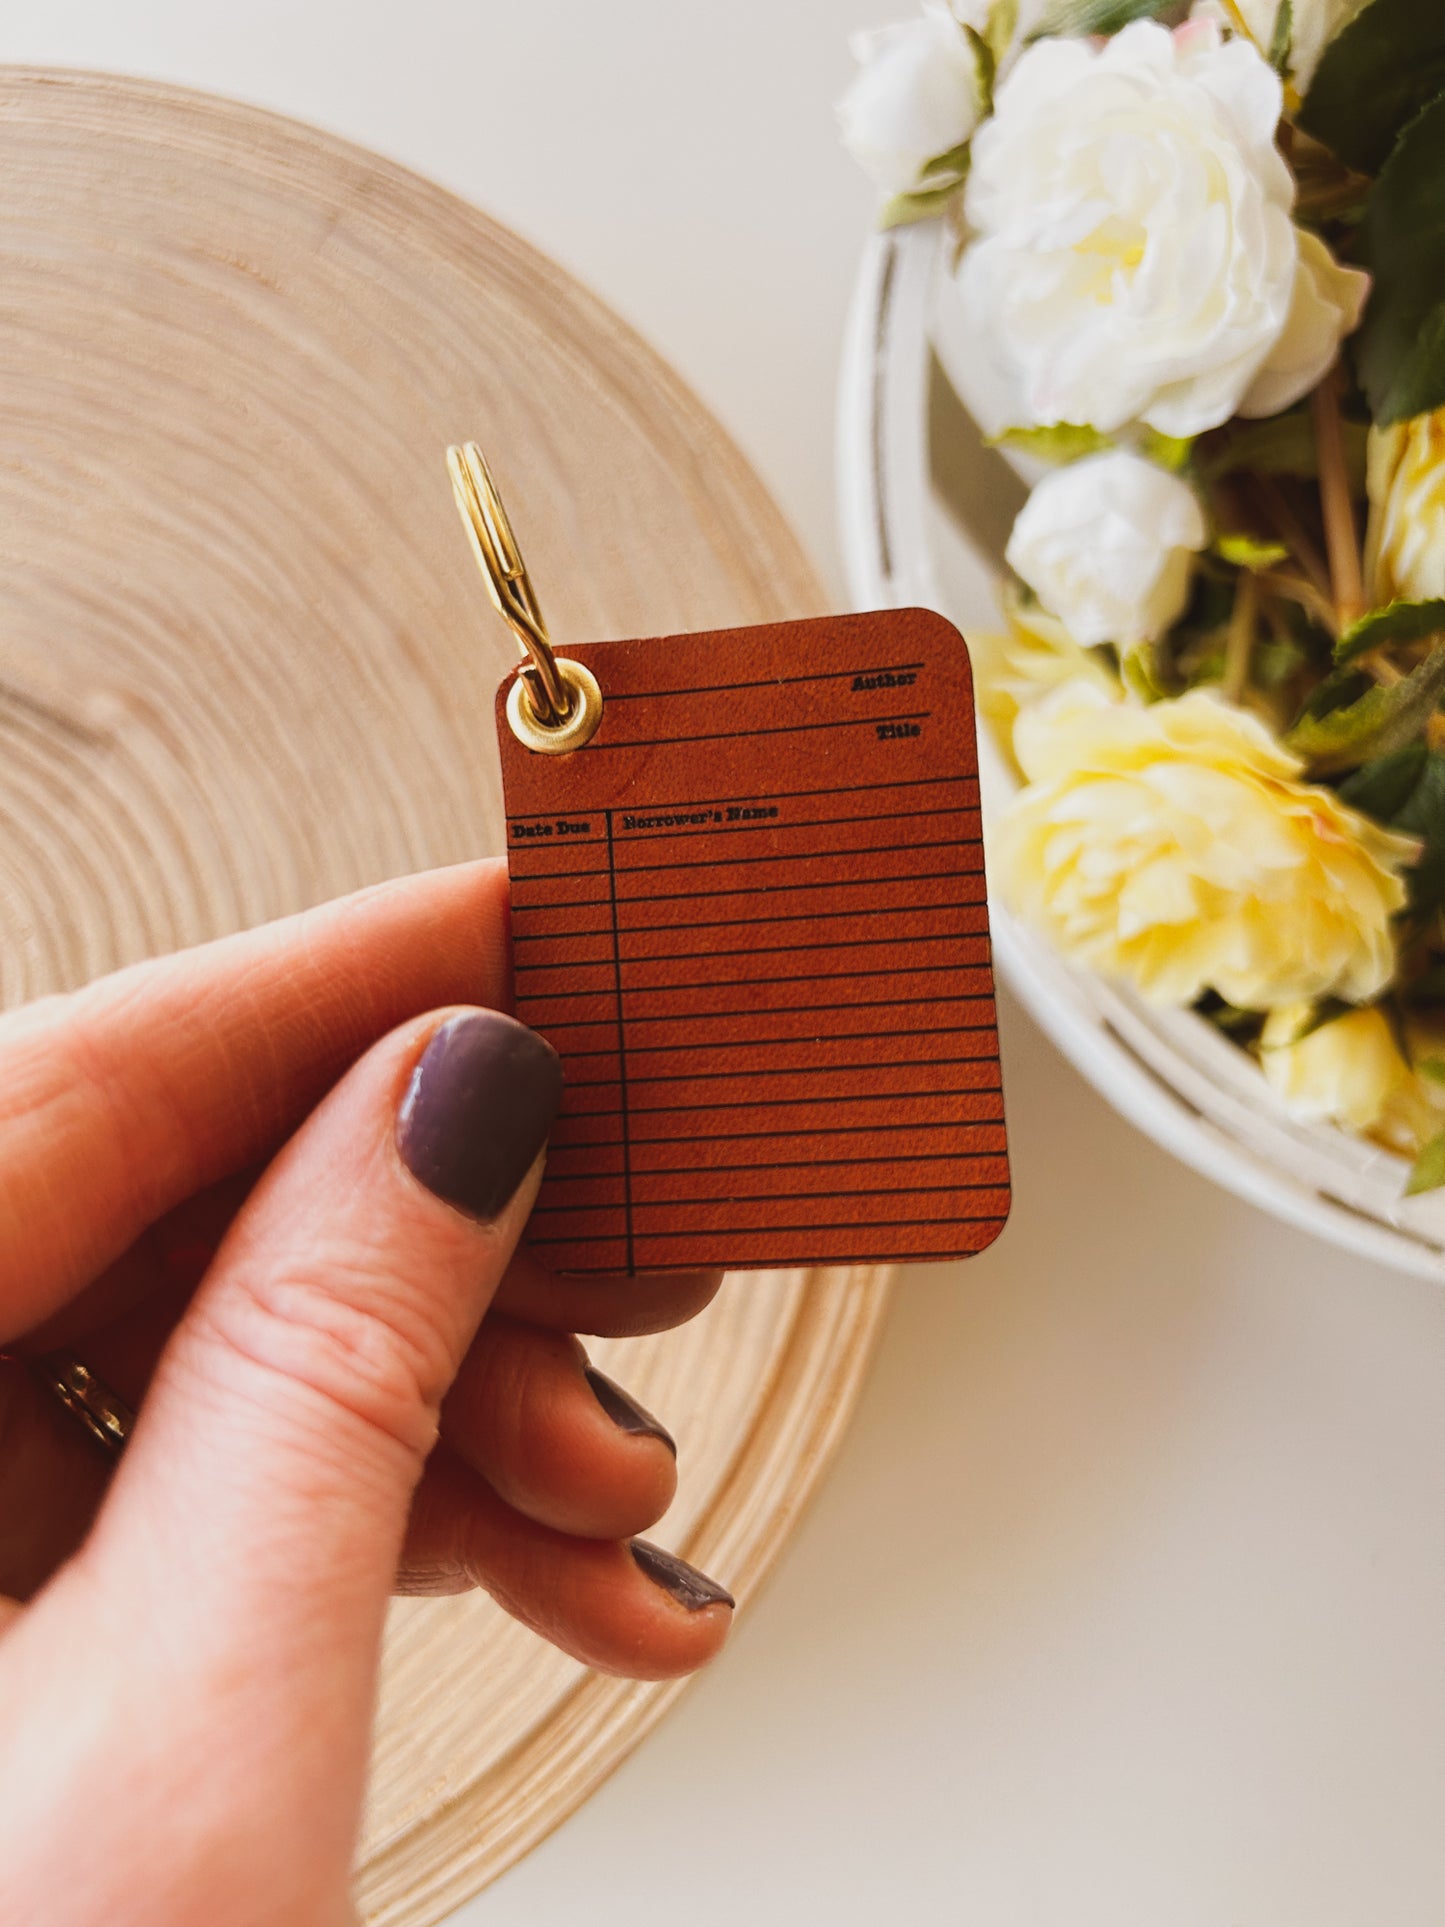 Vintage Library Card Keychain